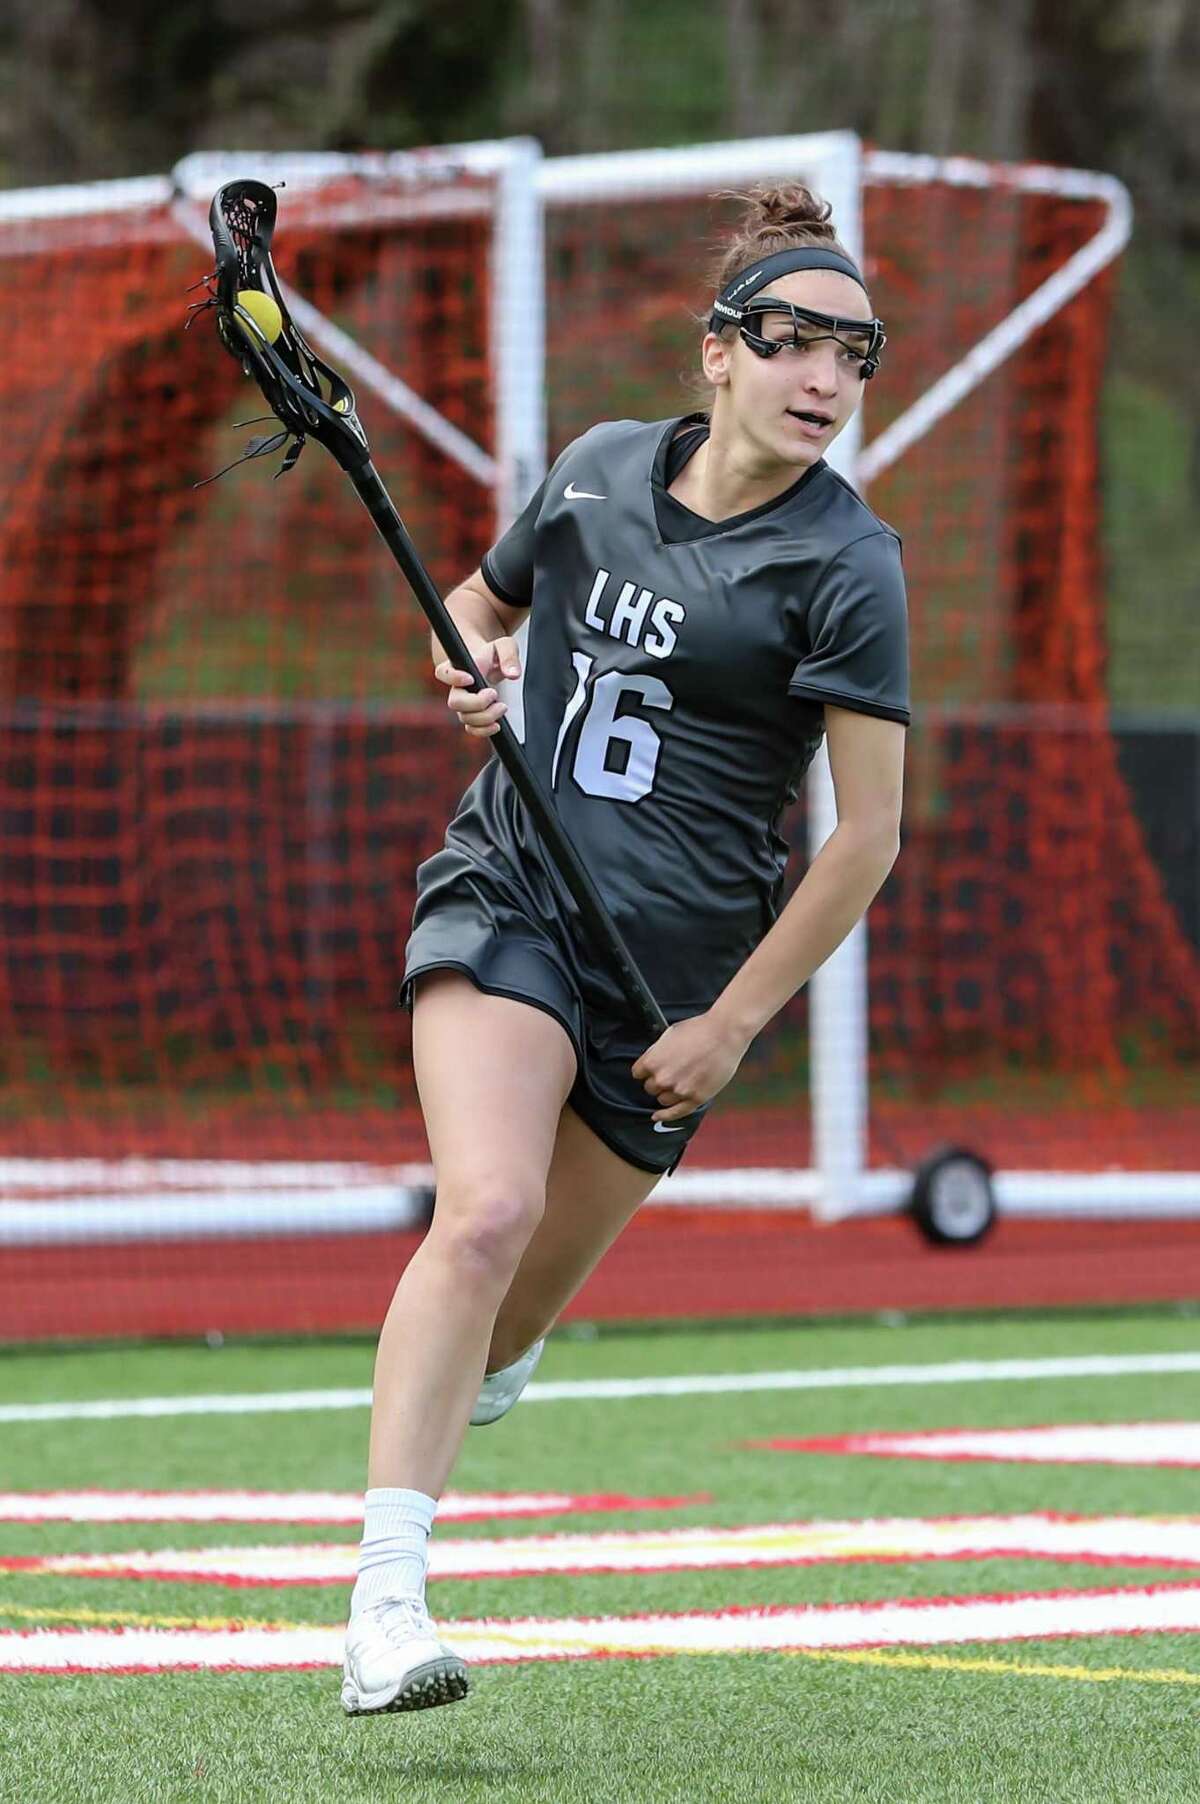 Shannon Kingston (16) of Longmeadow carries the ball during a game between Greenwich Girls Varsity Lacrosse and Longmeadow Girls Varsity Lacrosse on April 15, 2019 at Greenwich High School in Greenwich, CT.